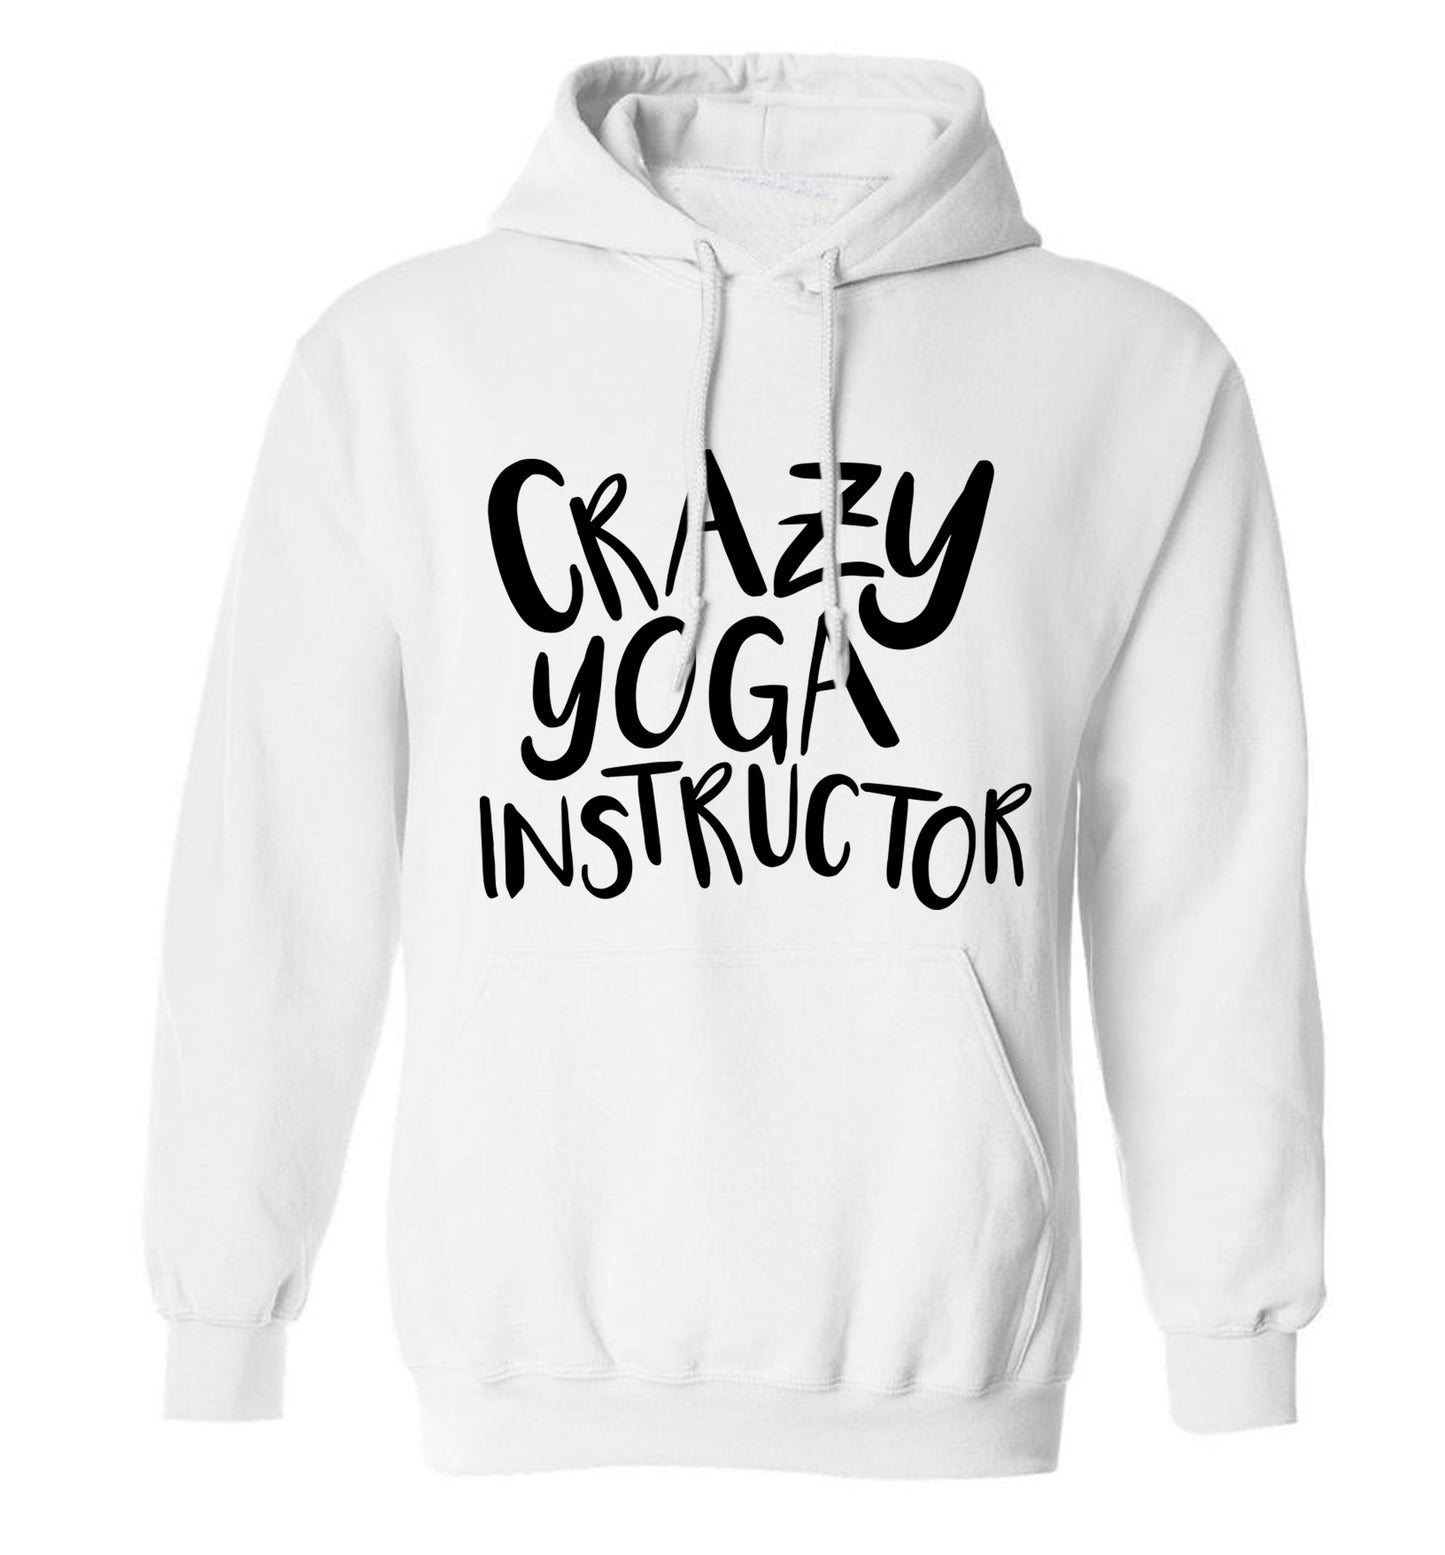 Crazy yoga instructor adults unisex white hoodie 2XL